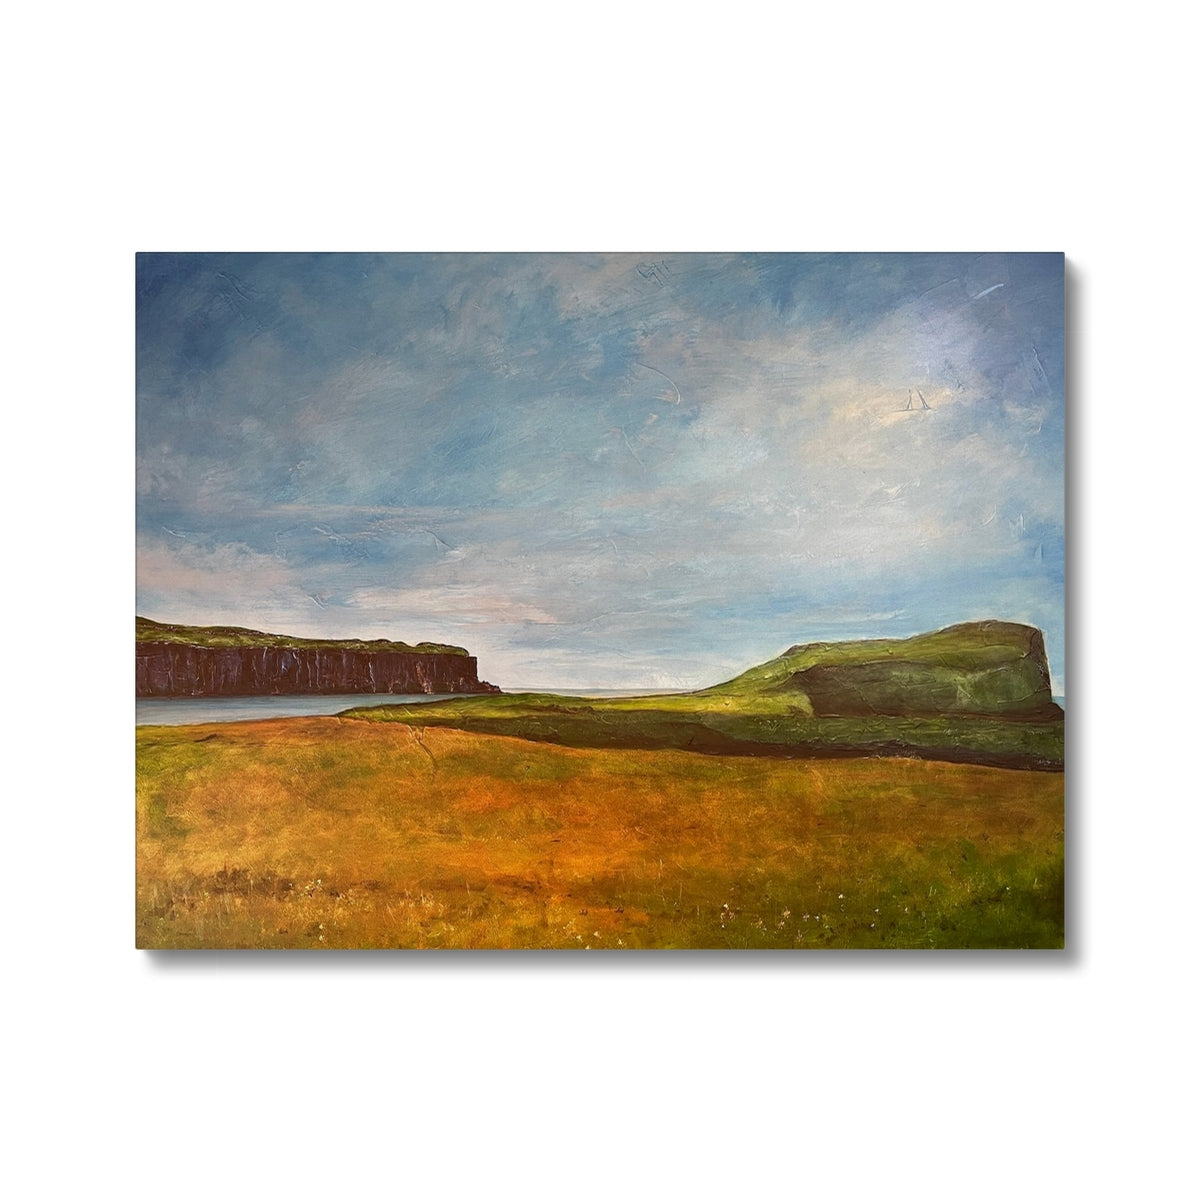 Approaching Oronsay Skye Painting | Canvas From Scotland-Contemporary Stretched Canvas Prints-Skye Art Gallery-24"x18"-Paintings, Prints, Homeware, Art Gifts From Scotland By Scottish Artist Kevin Hunter